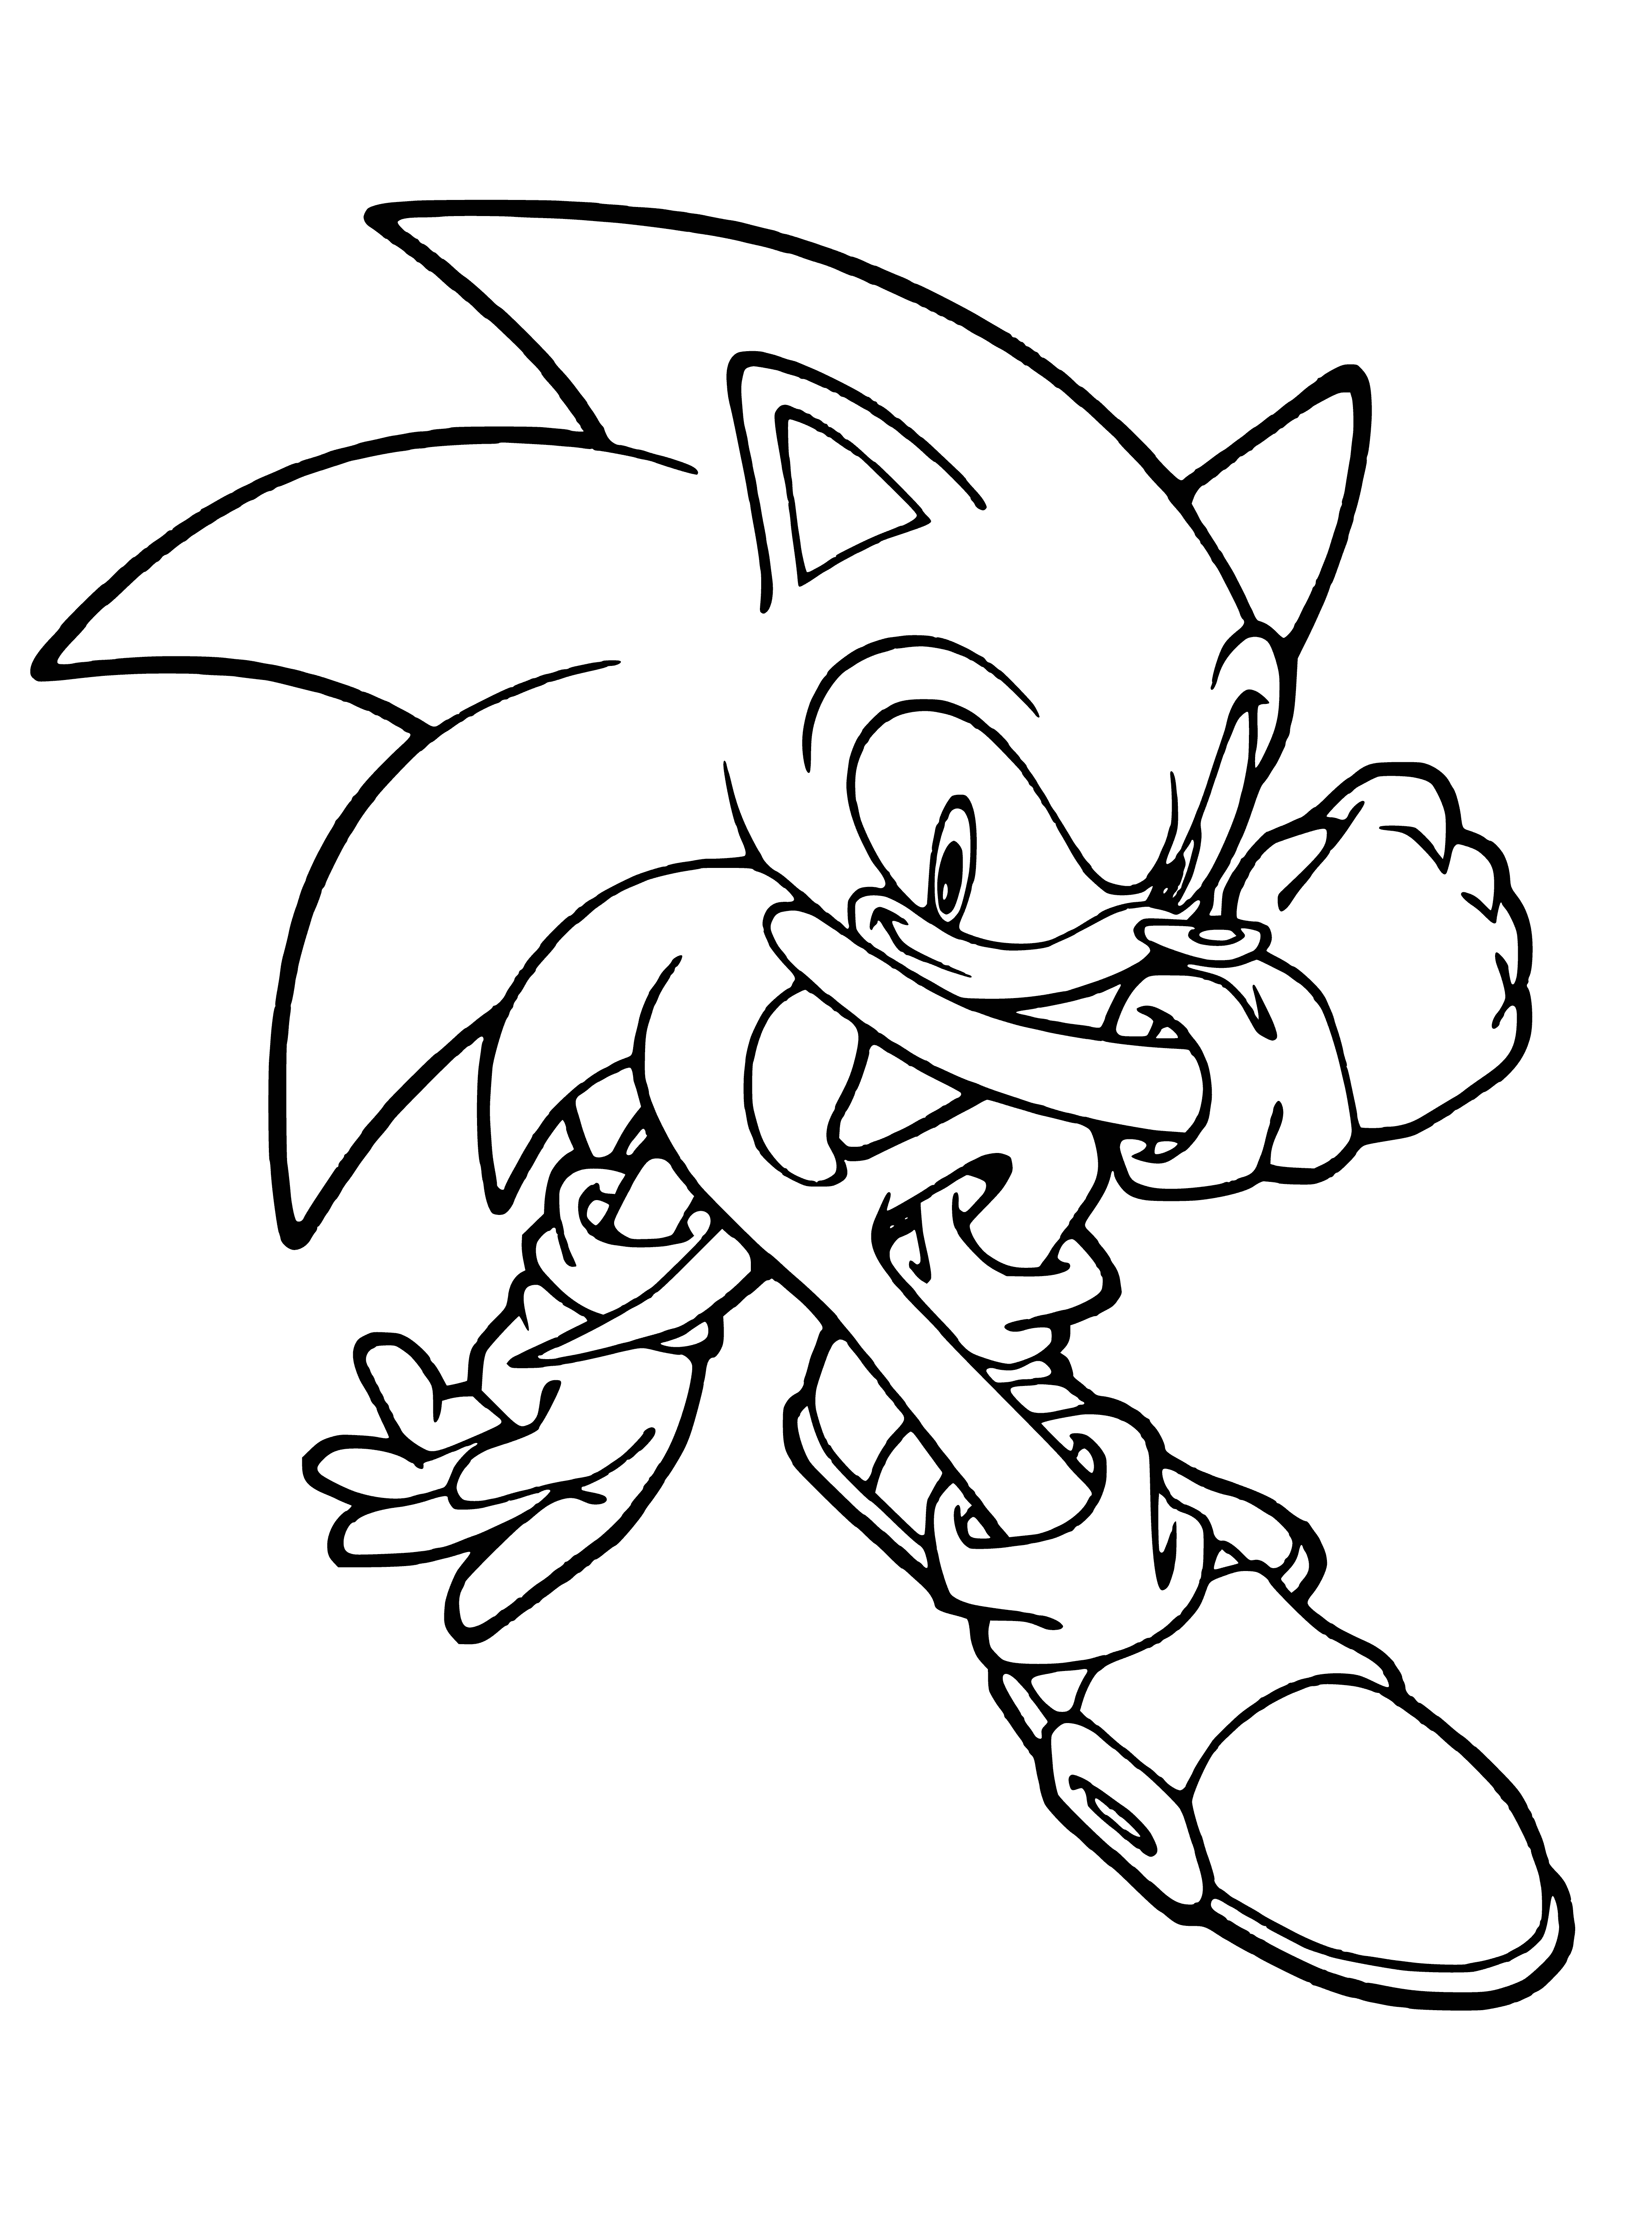 coloring page: Sonic runs across a grassy field with blue sky and white clouds, in blue shirt and red shoes with a determined expression.